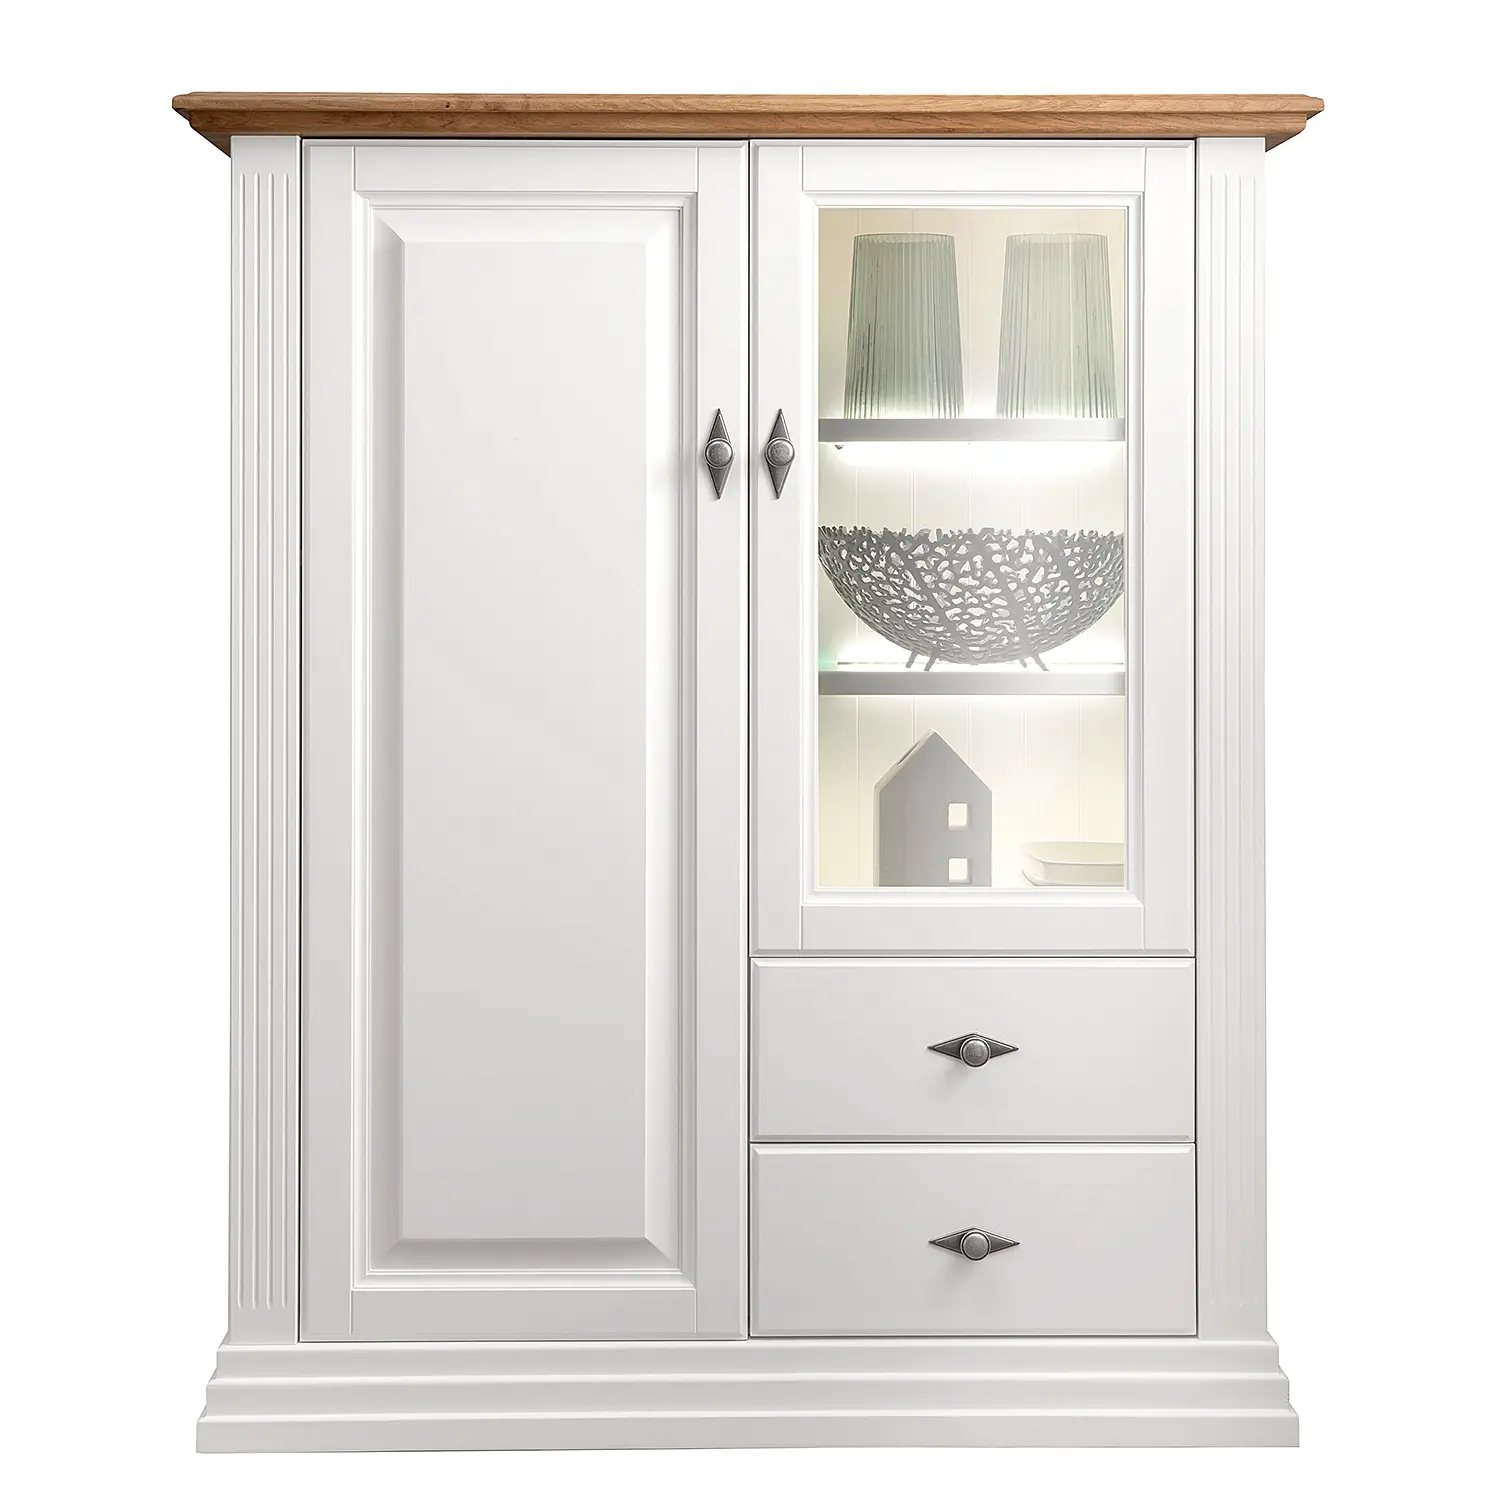 A Brattby Massives Typ Highboard